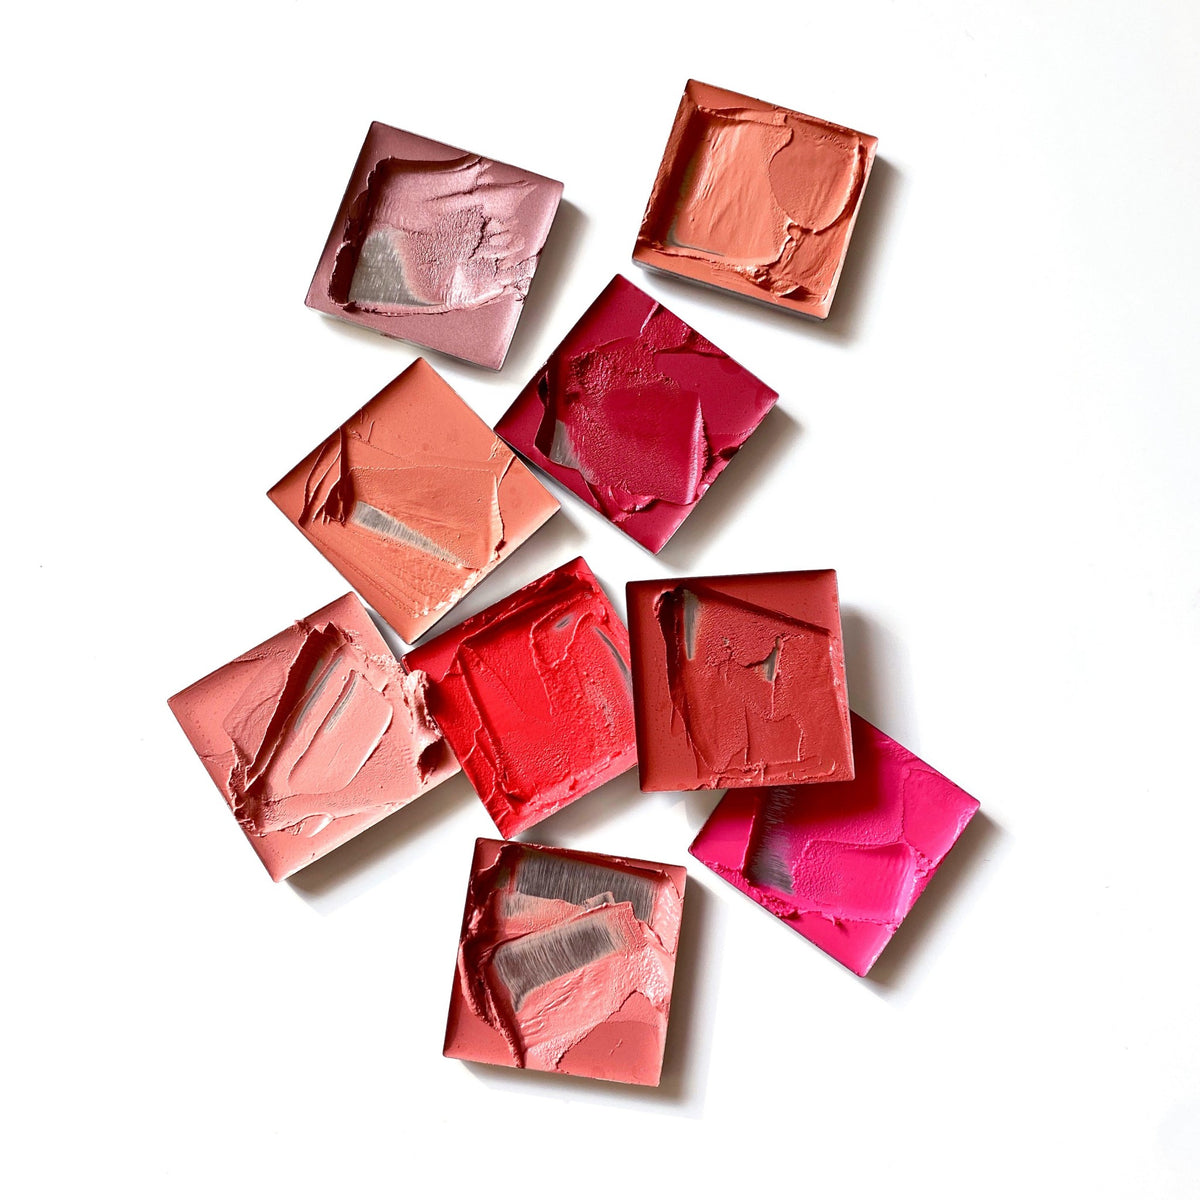 Kjaer Weis Cream Blush Refill . This product is in the color pink